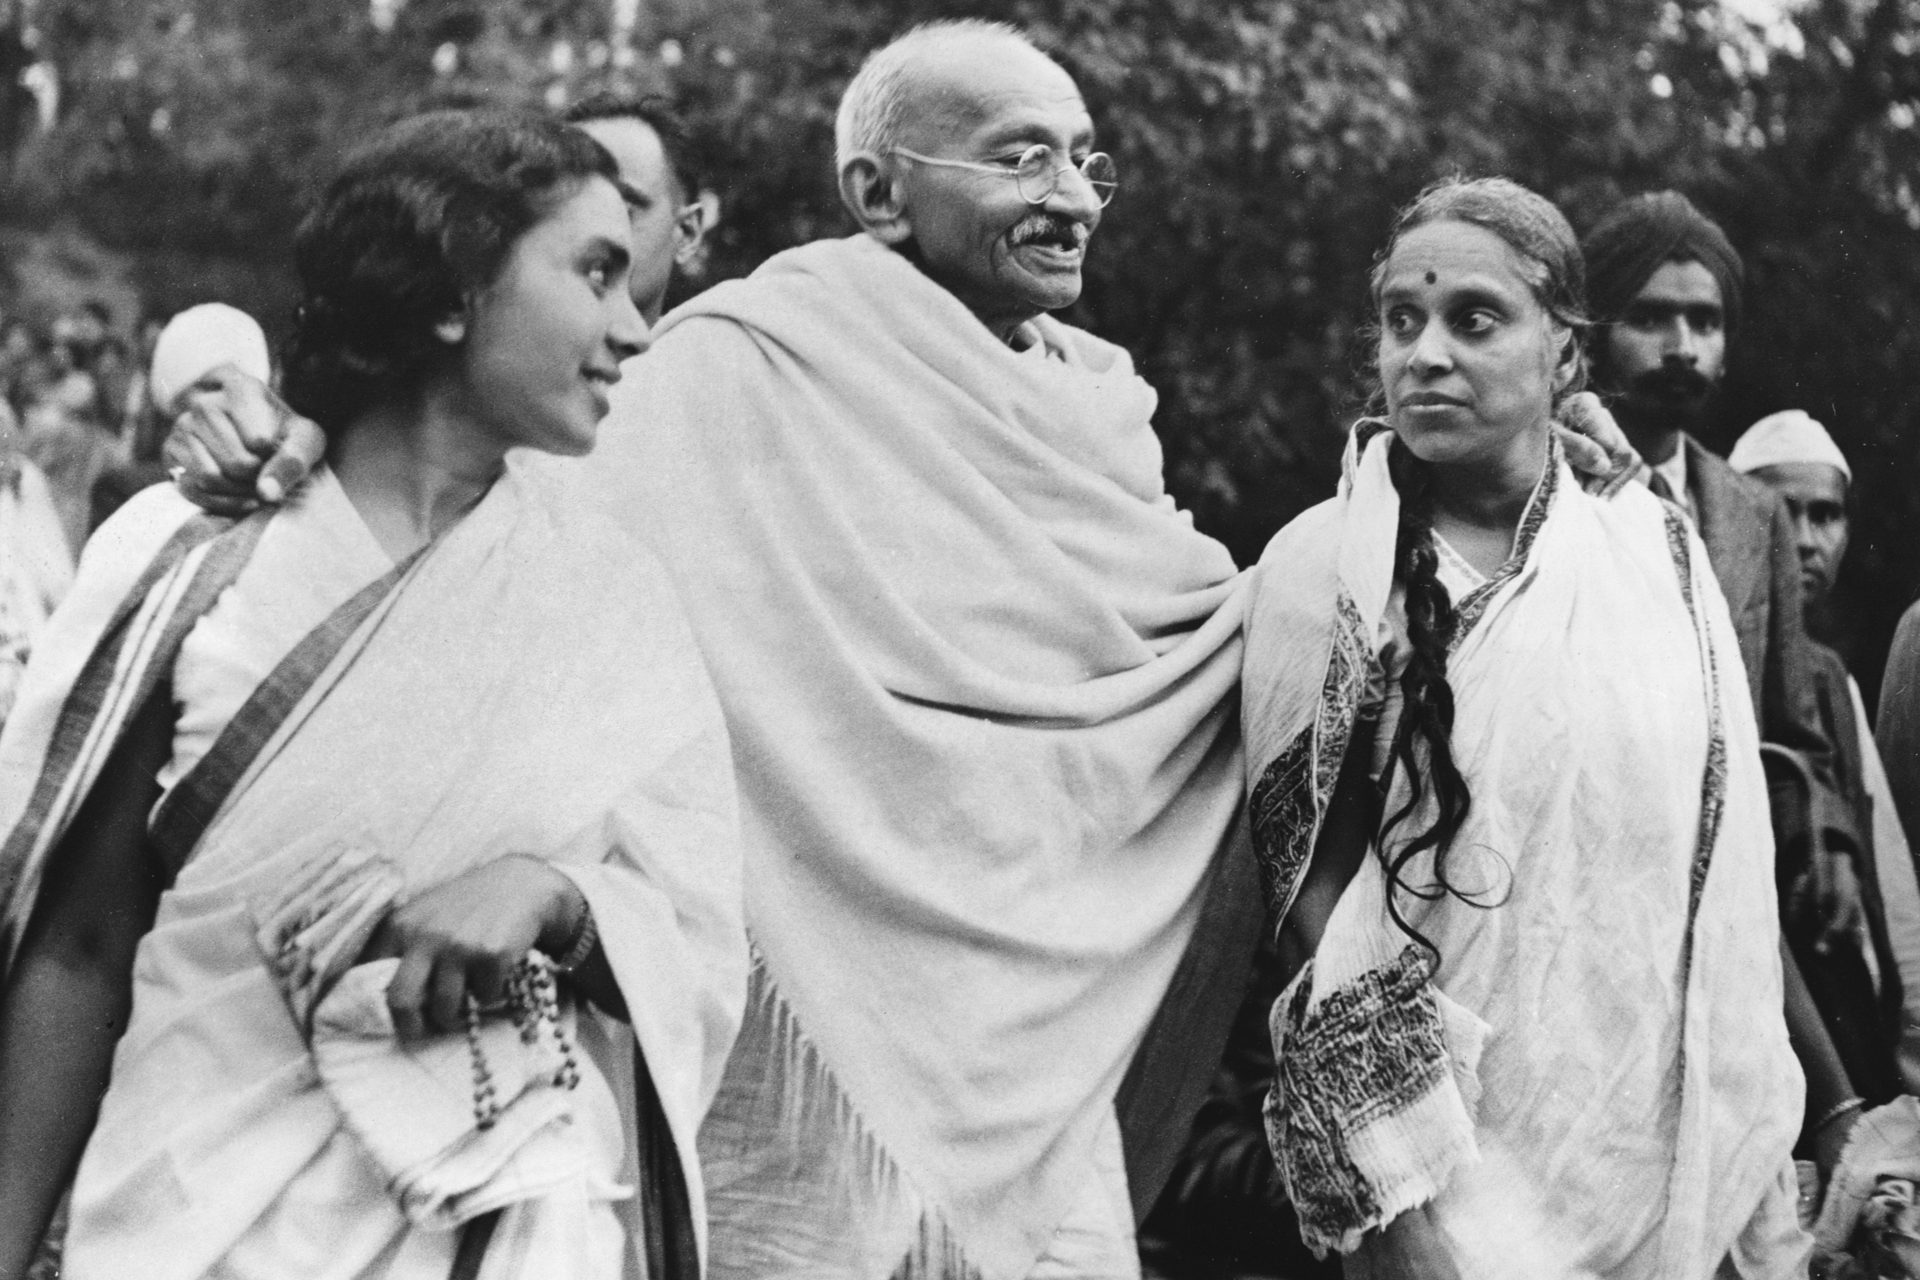 <p>At 77, Mahatma Gandhi was fighting to unify India, a country torn by tensions between Hindus and Muslims. On January 30, 1948, he went to a public prayer in Delhi when a Hindu nationalist shot him three times. The famous spiritual guide would then have murmured "Ram, Ram" ("God, God").</p>